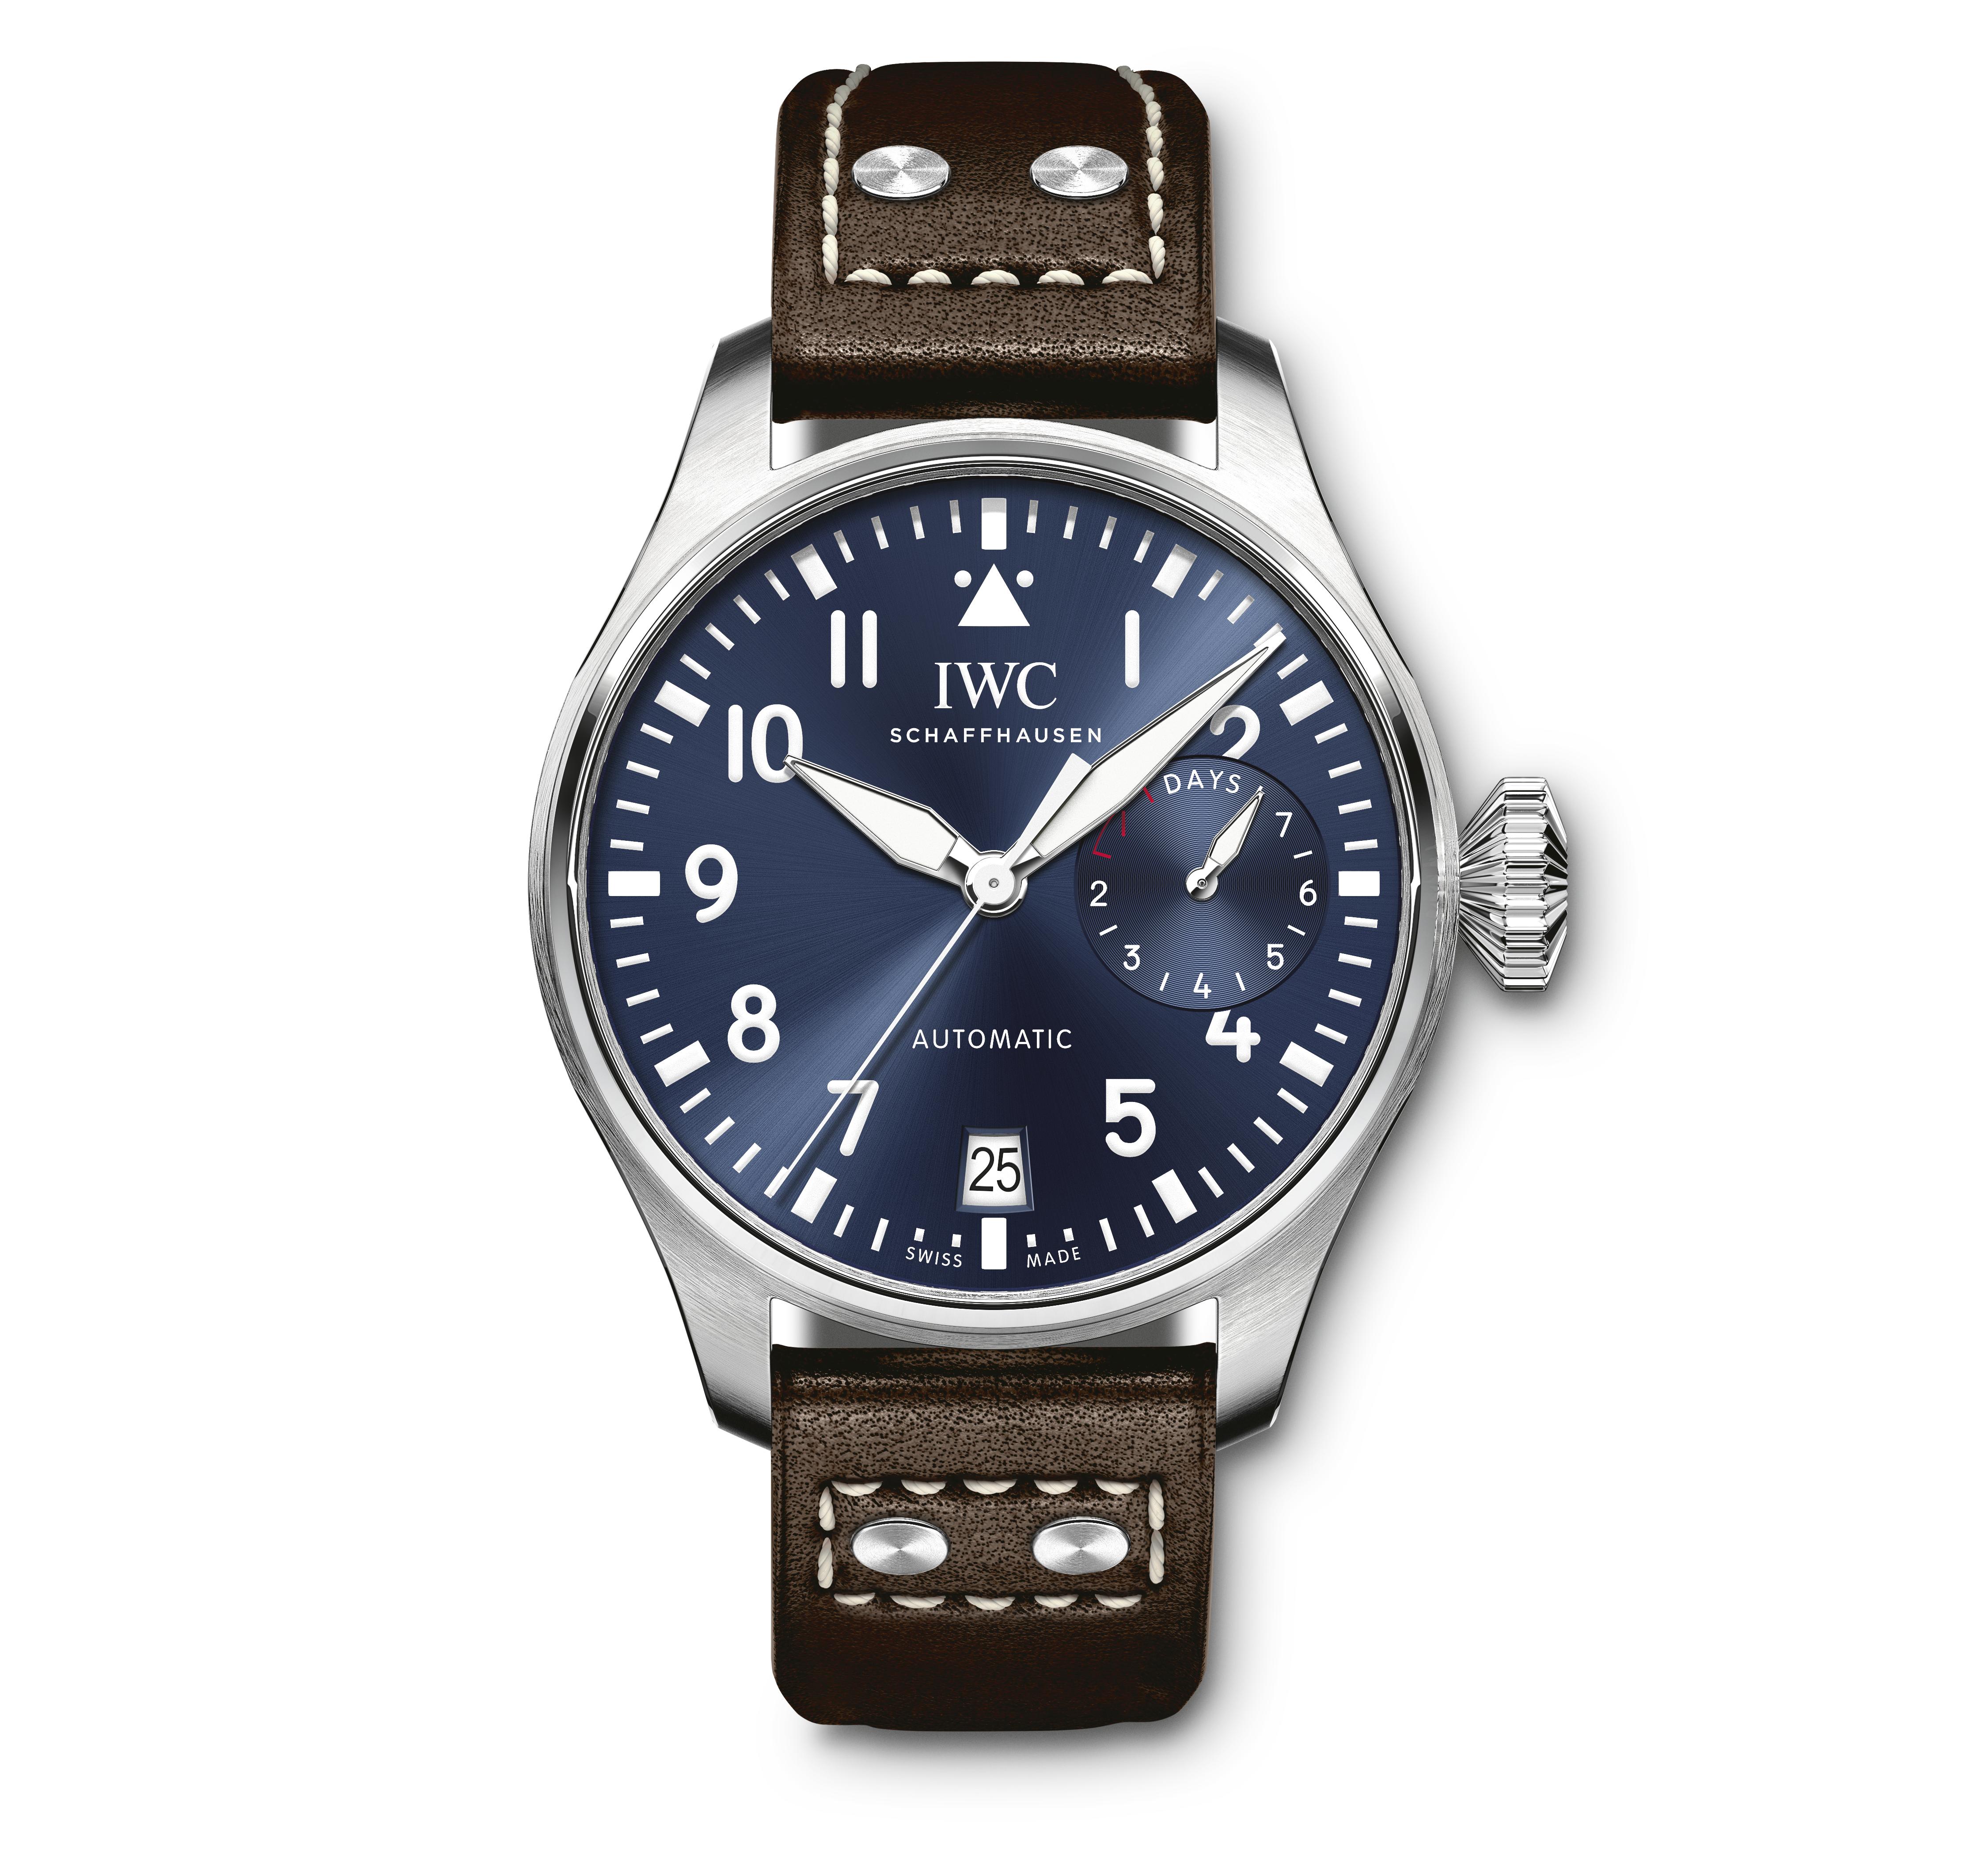 IW501002 Big Pilot's Watch Edition "Le Petit Prince" in stainless steel with Brown calfskin strap Front Mechanical movement · Pellaton automatic winding · IWC-manufactured 52110 calibre (52000-calibre family) · 7-day power reserve when fully wound · Power reserve display · Date display · Central hacking seconds · Breguet spring · Soft-iron inner case for protection against magnetic fields · Screw-in crown · Sapphire glass, convex, antireflective coating on both sides · Glass secured against displacement by drops in air pressure · Engraving of “The Little Prince” on case back · Water-resistant 6 bar · Case height 15.6 mm · Diameter 46.2 mm · Calfskin strap by Santoni